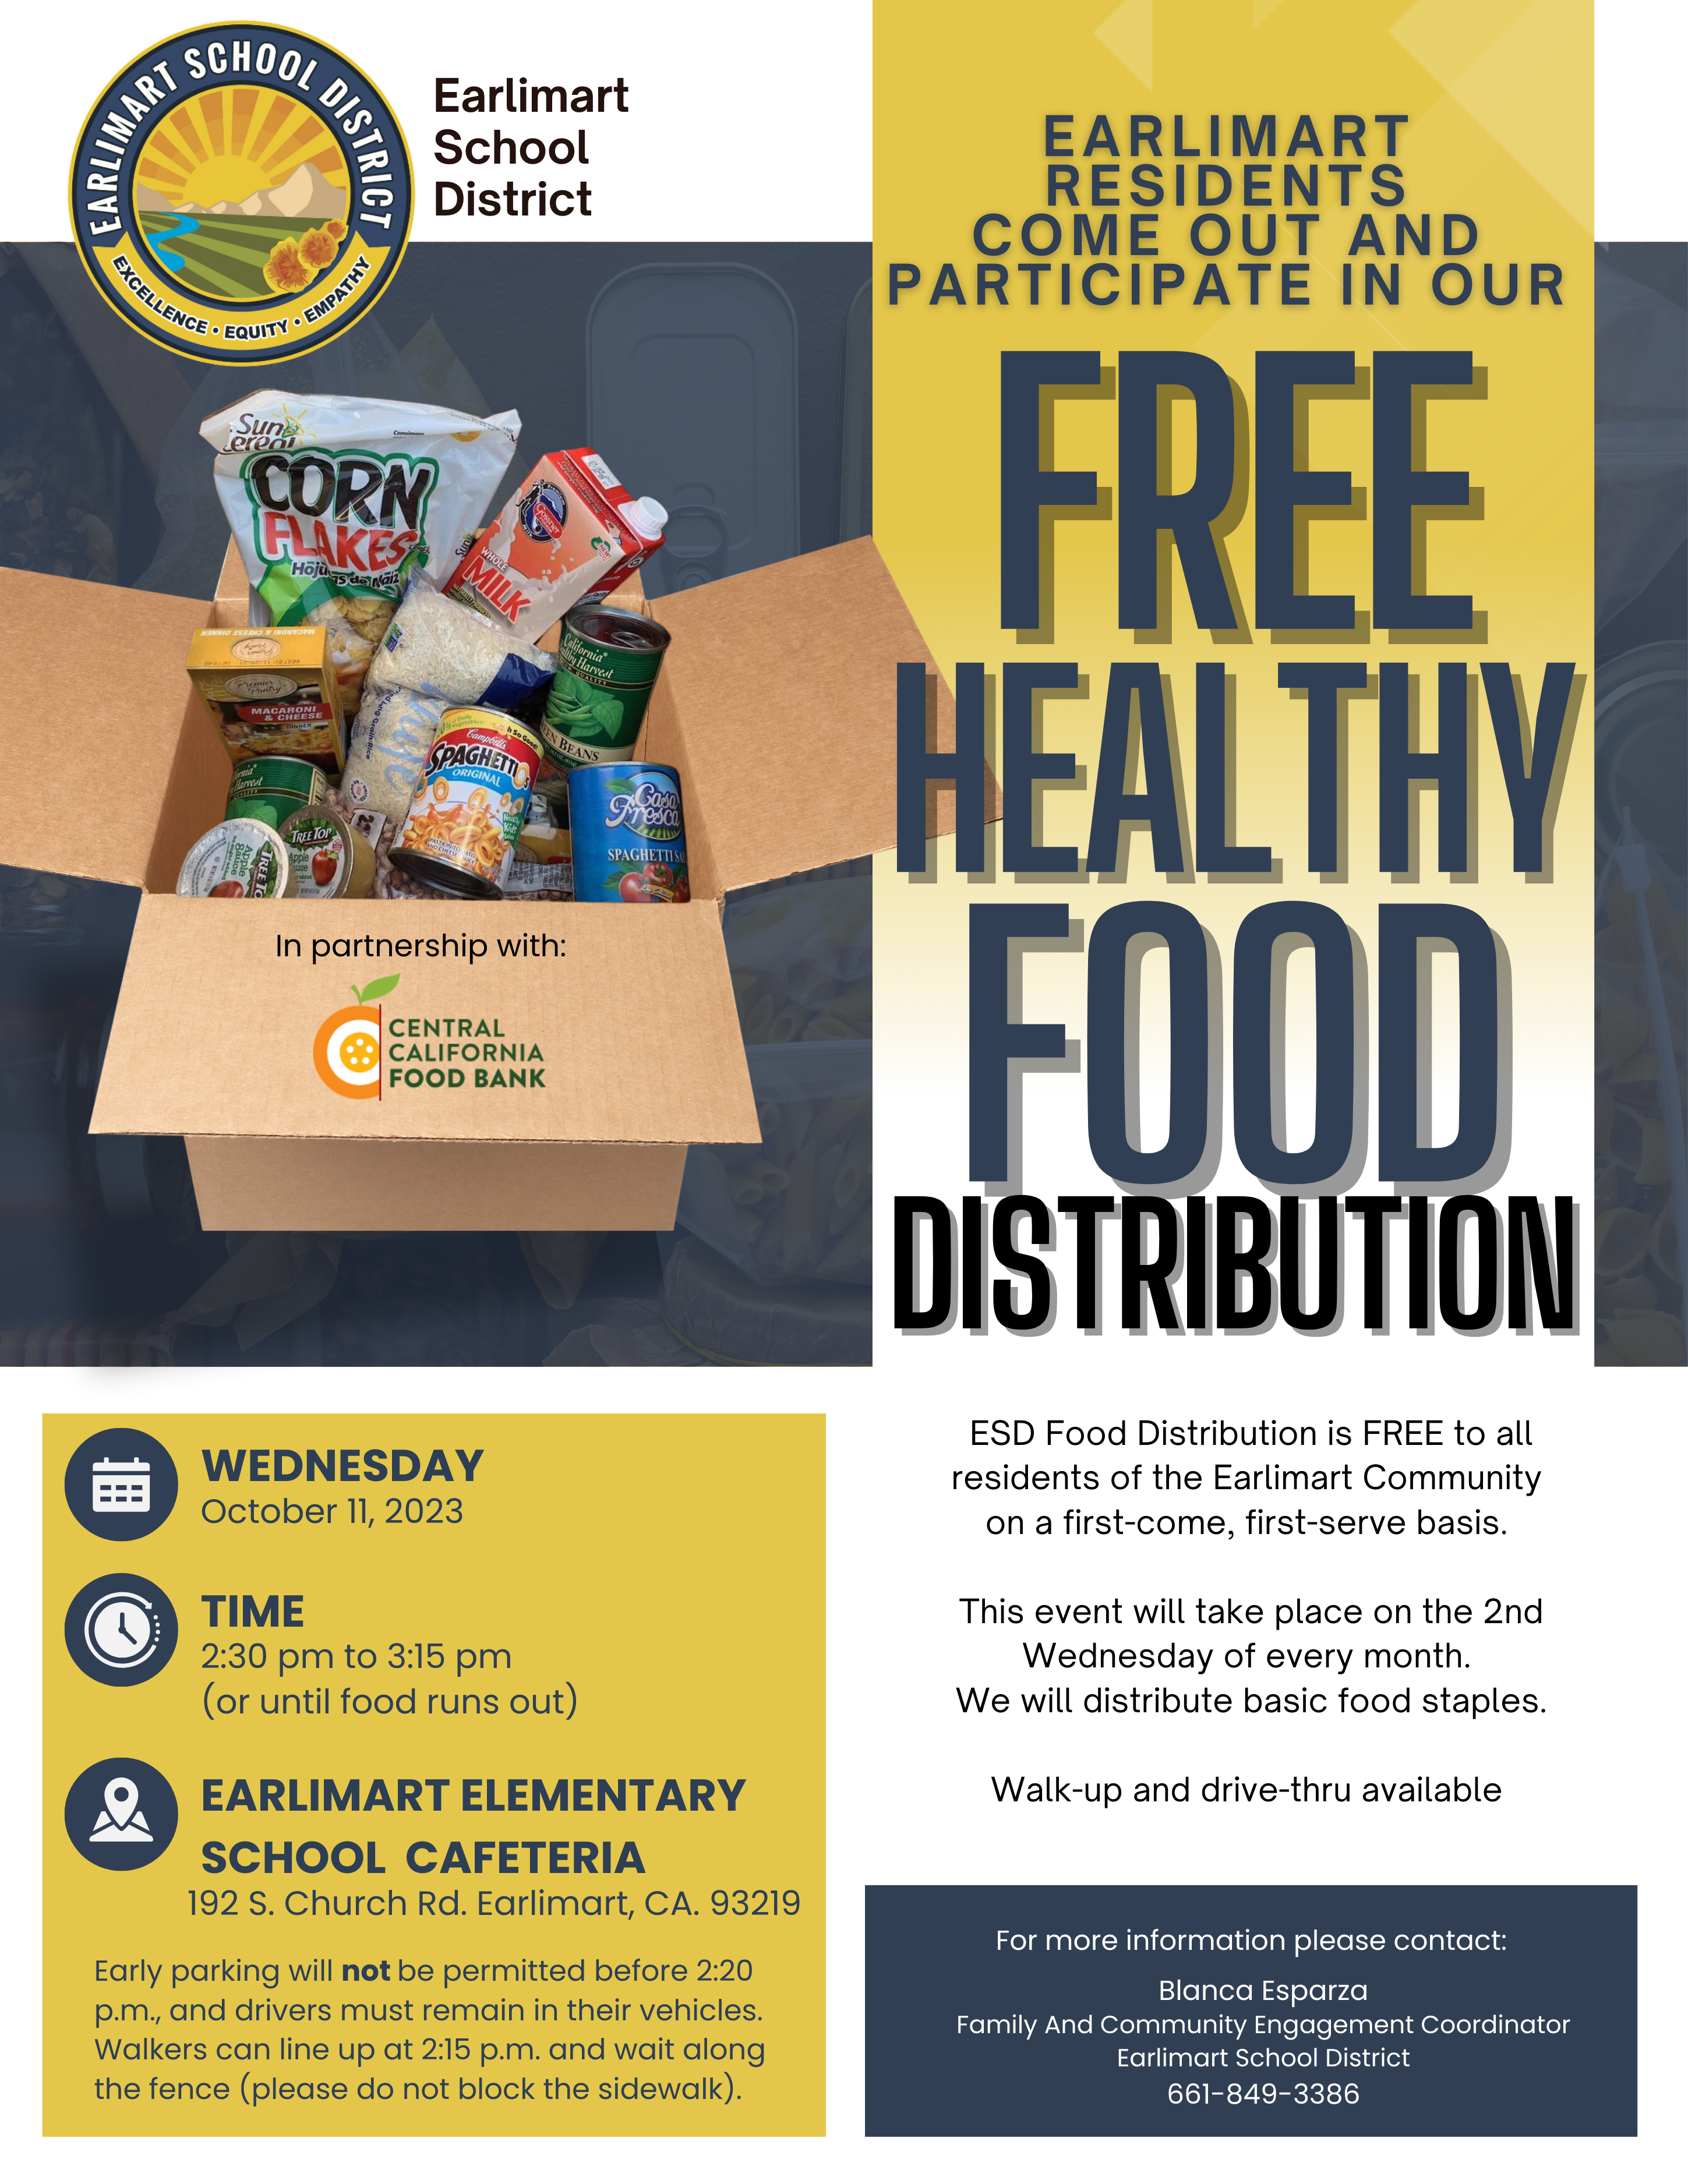 ESD logo, Box with food staples, information on free food distribution (all information in article)